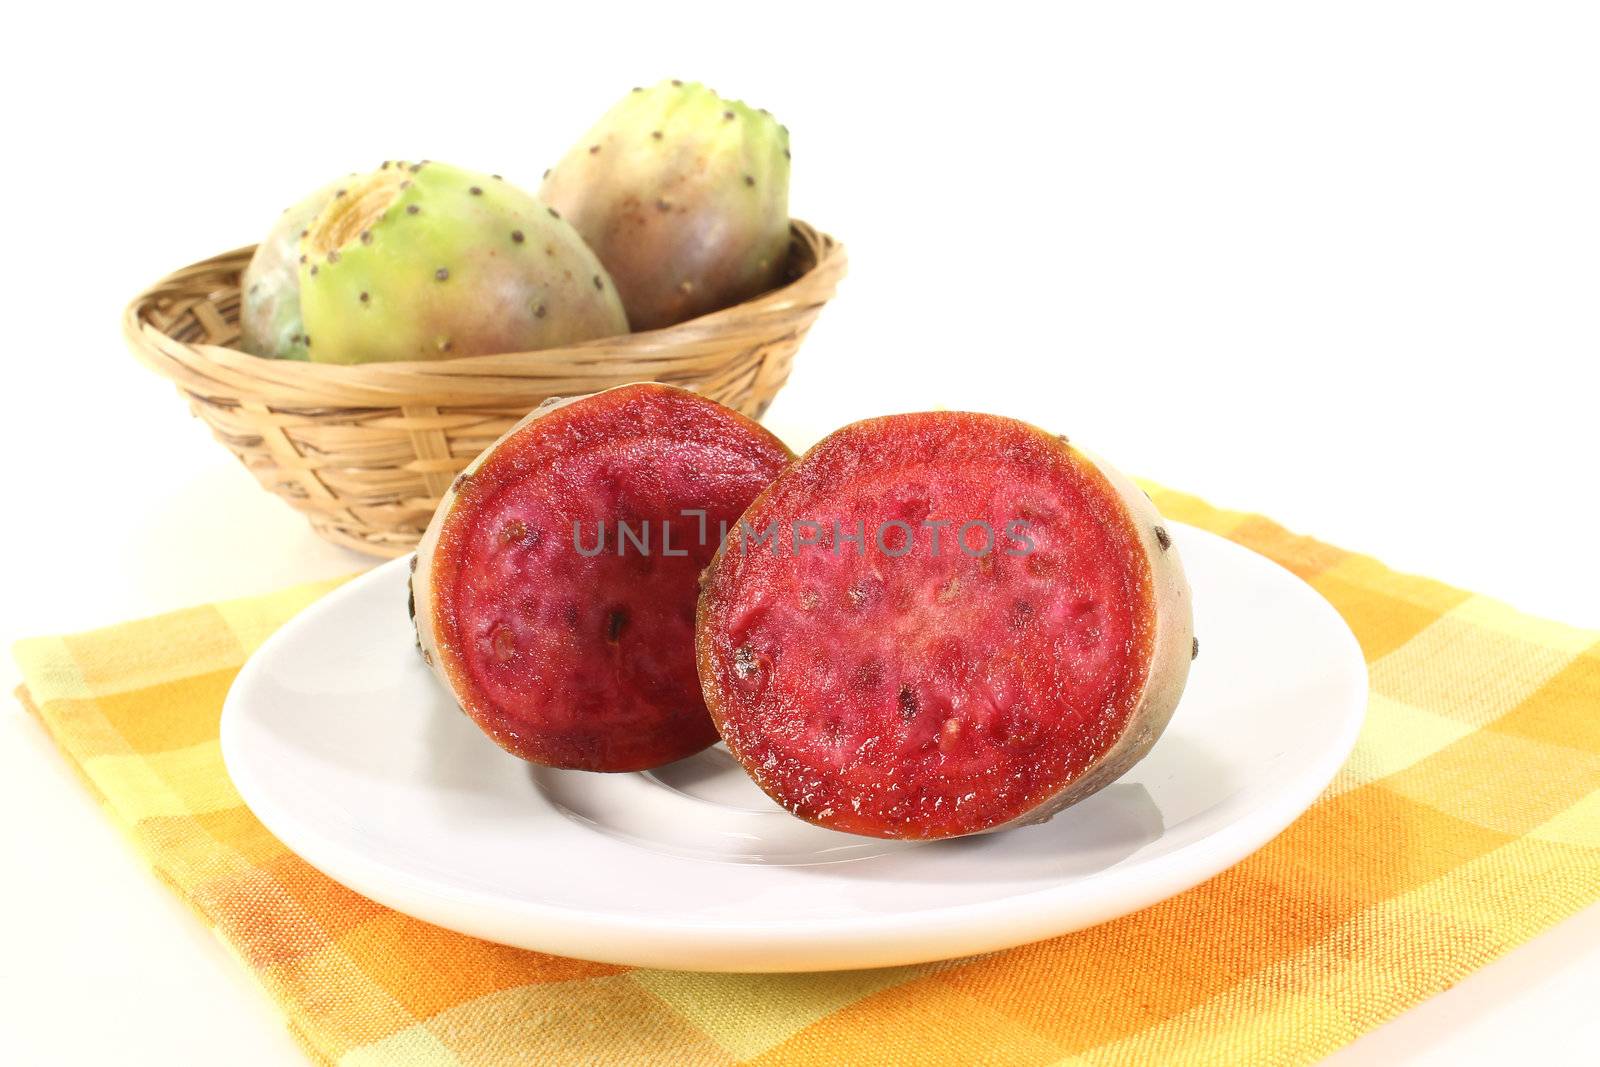 red succulent cactus figs on a plate in front of light background